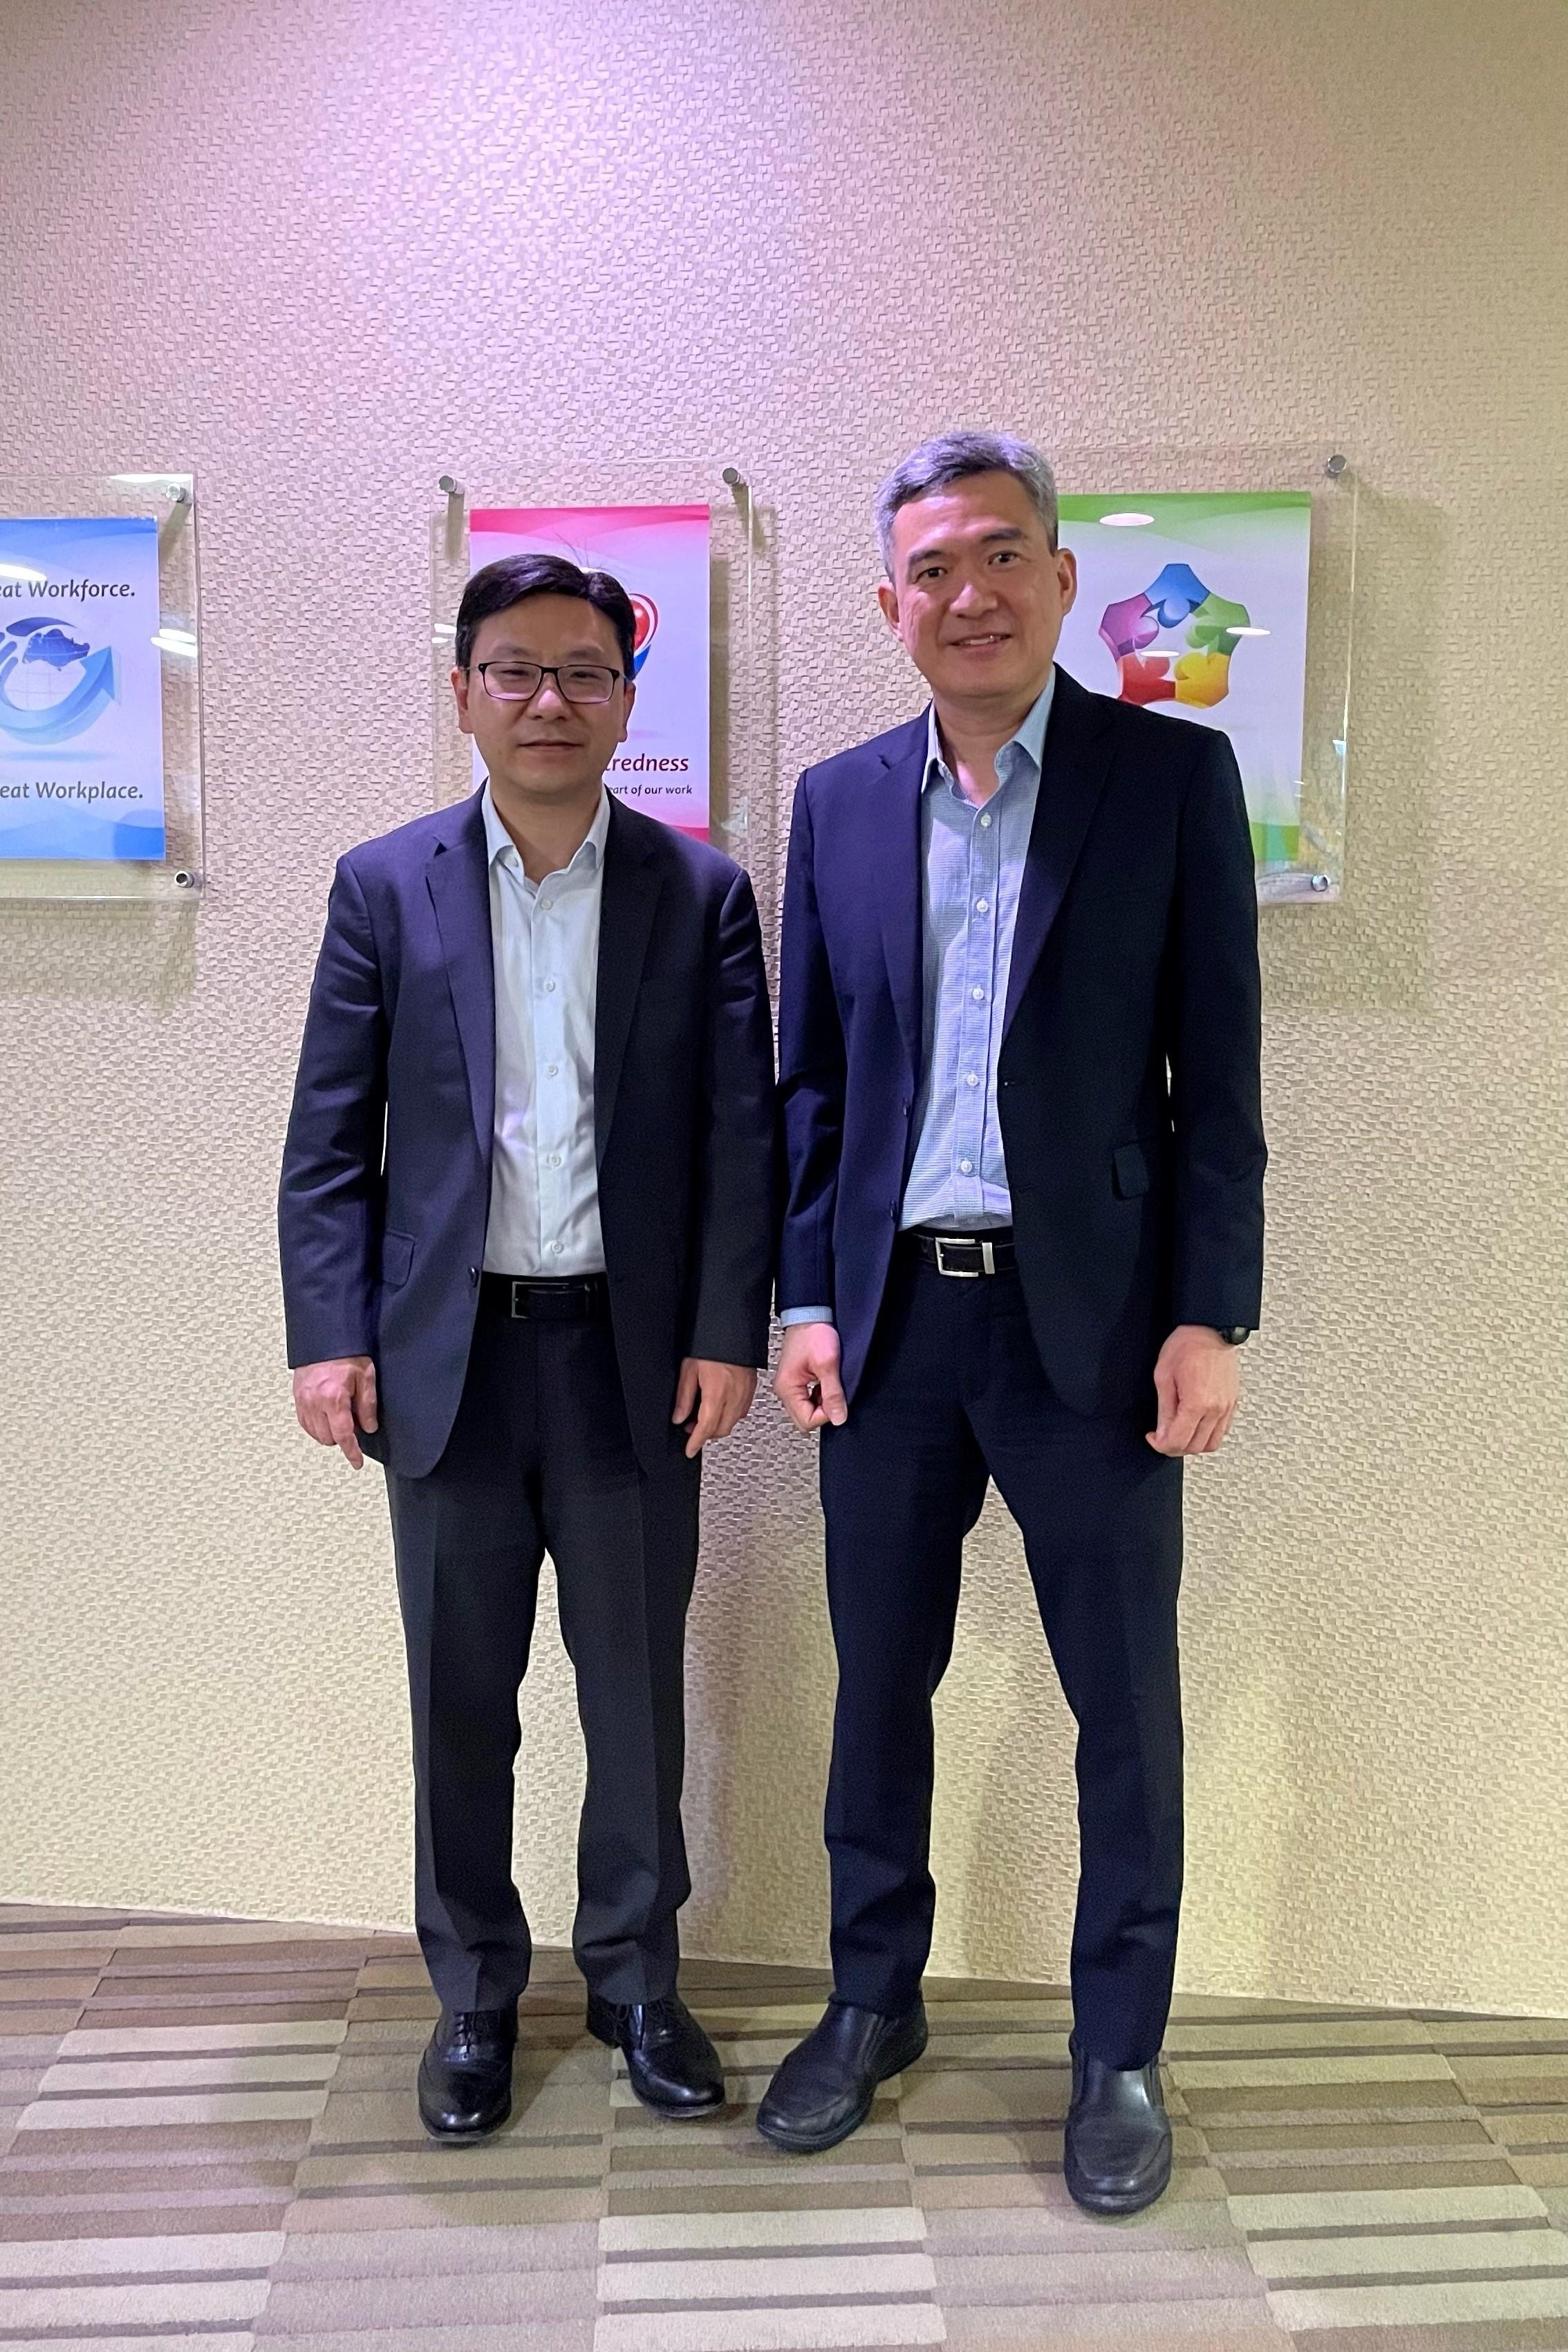 The Secretary for Labour and Welfare, Mr Chris Sun, met with representatives of the "Tripartite Workgroup on Representation for Platform Workers" this afternoon (January 5) during his visit to Singapore to learn more about the protection of rights and benefits of digital platform workers. Photo shows Mr Sun (left) and the Co-chairperson of the Tripartite Workgroup and the Deputy Secretary of the Ministry of Manpower of Singapore, Mr Poon Hong Yuen (right). The Tripartite Workgroup is co-chaired by the Singapore Government, the National Trades Union Congress and the Singapore National Employers Federation.